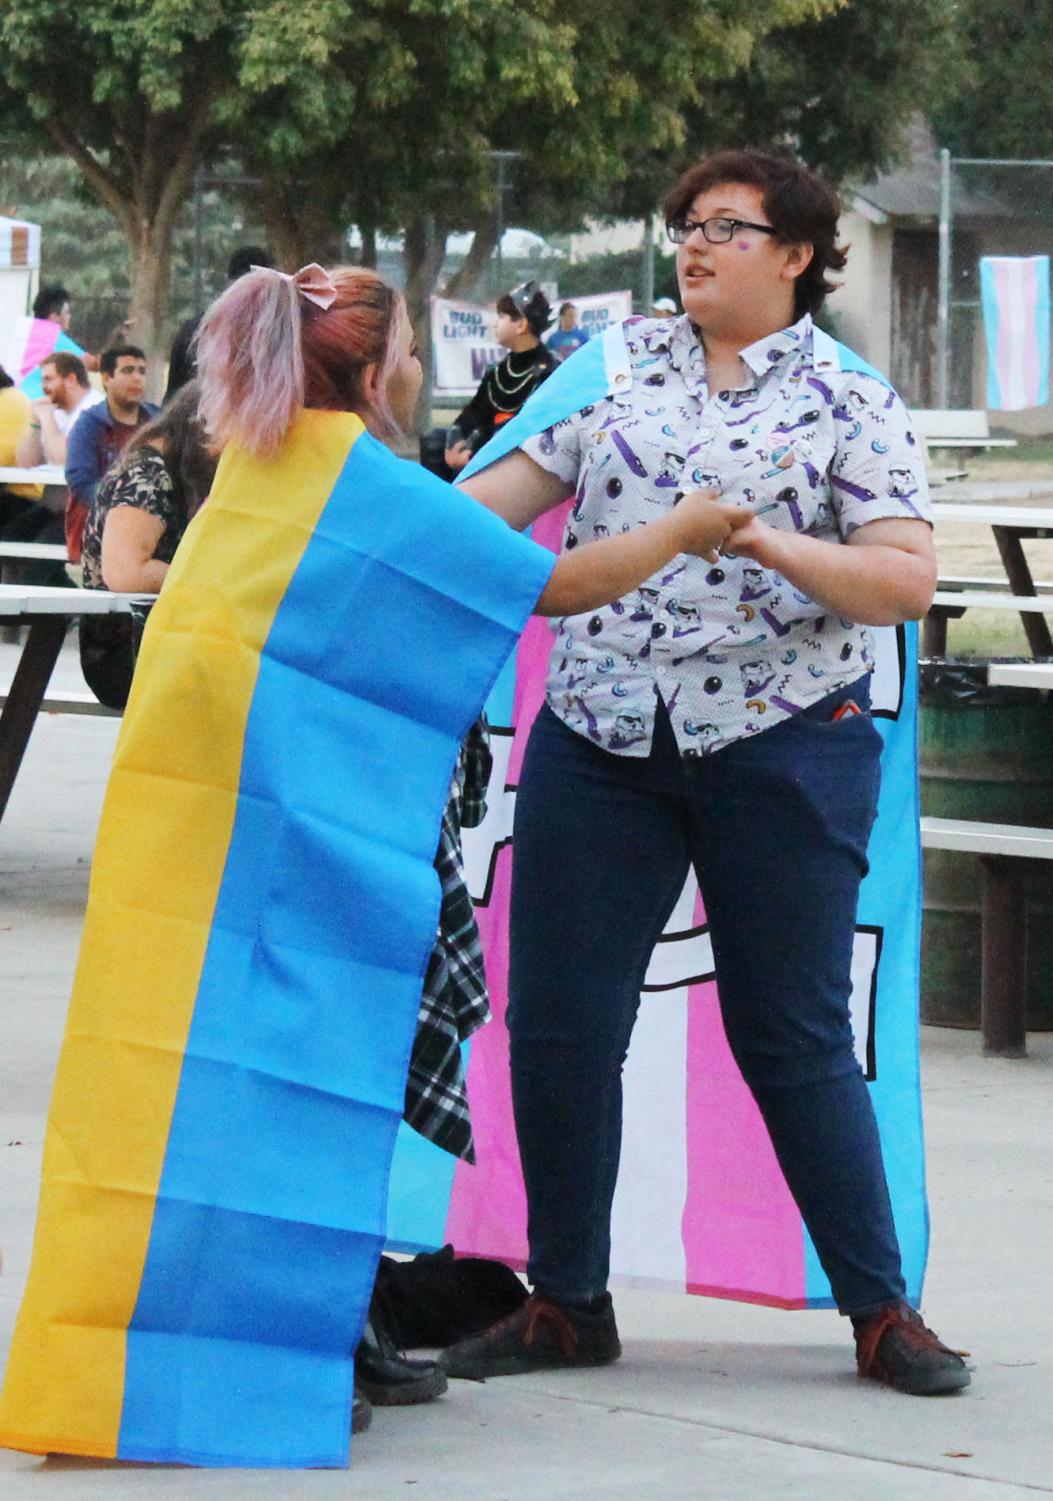 Bakersfield LGBTQ holds annual Pride fest The Renegade Rip